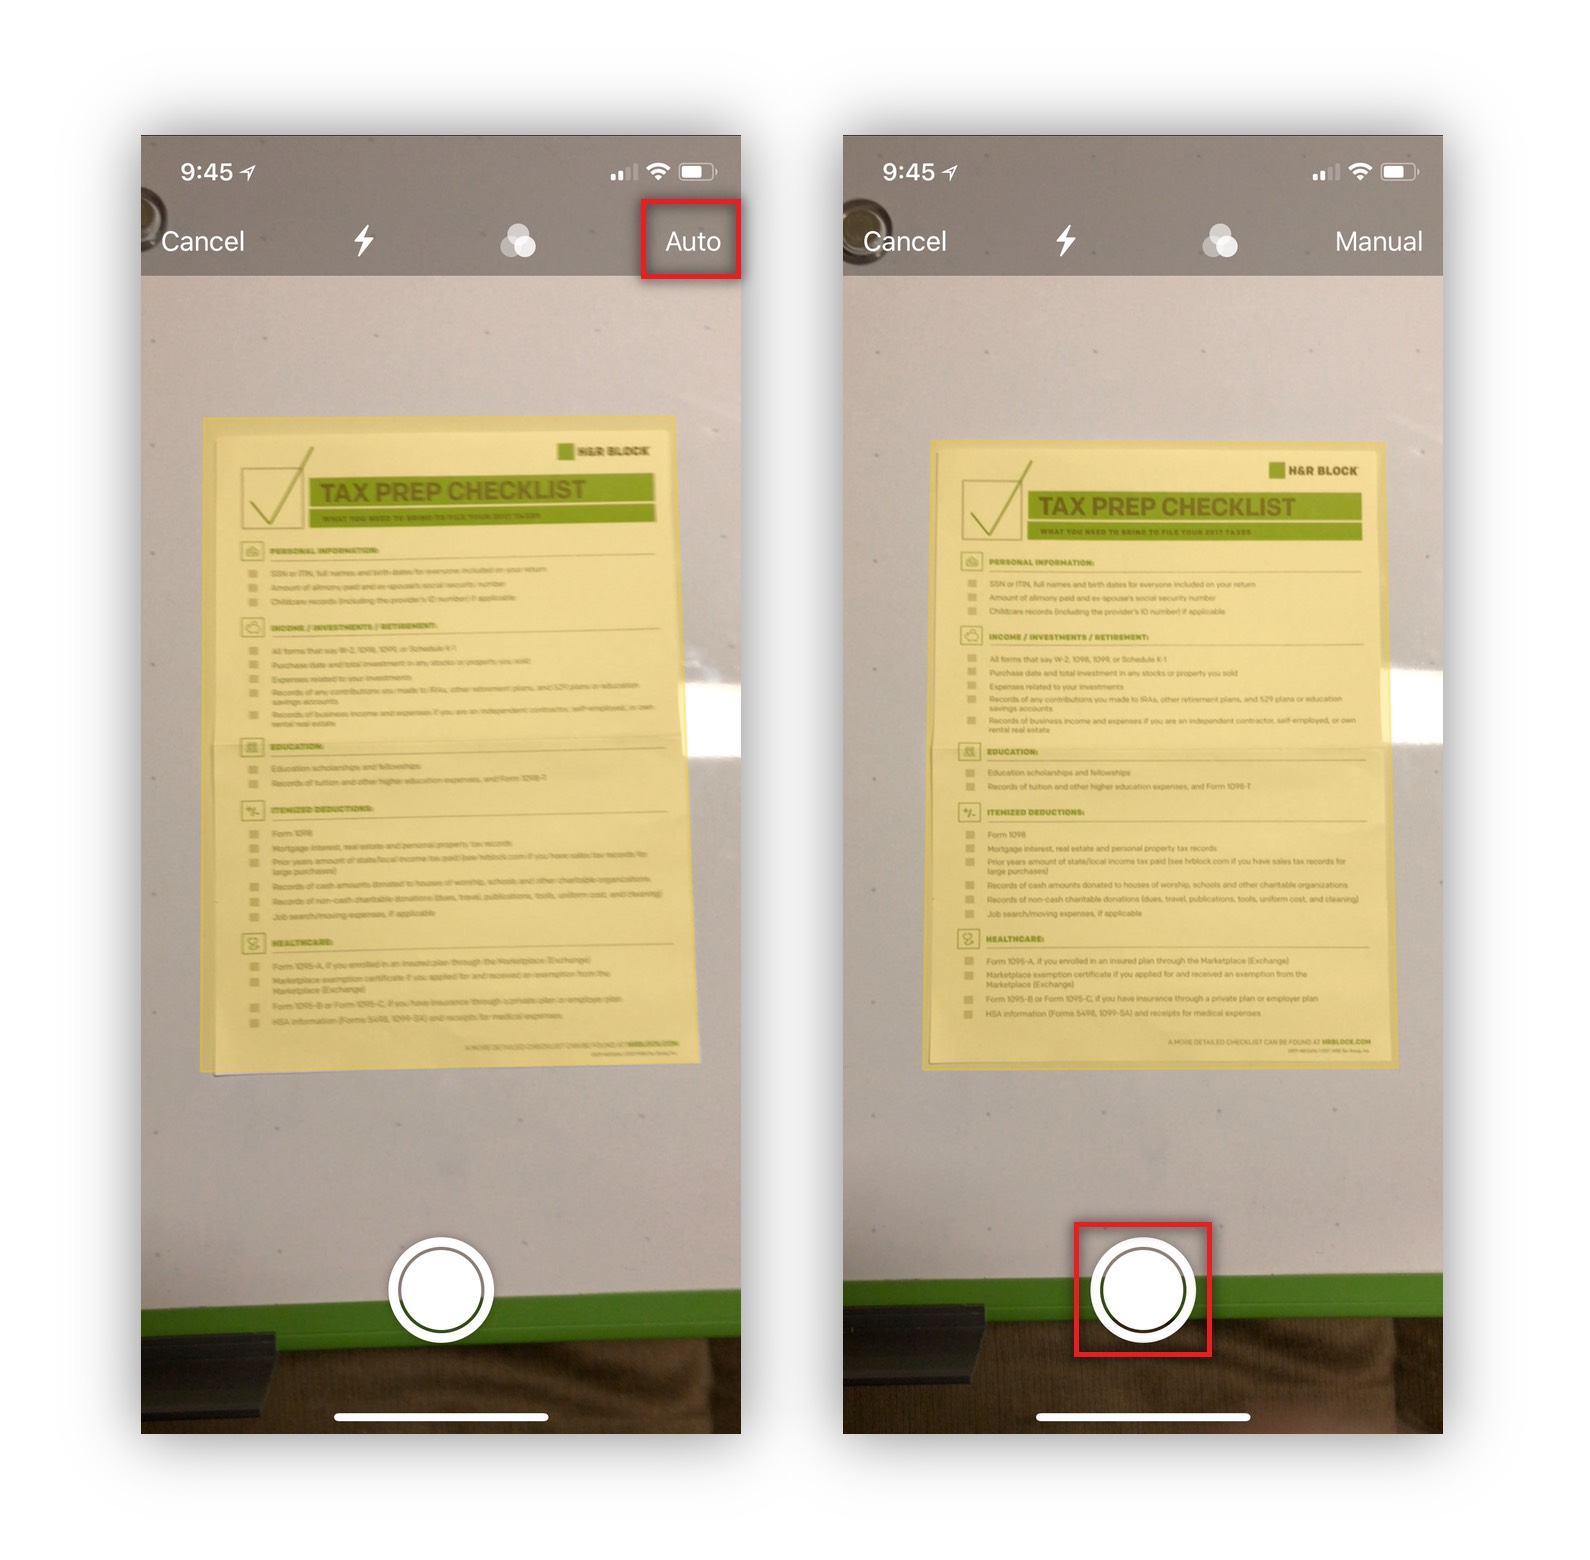 How To Scan A Document Using Notes on iOS